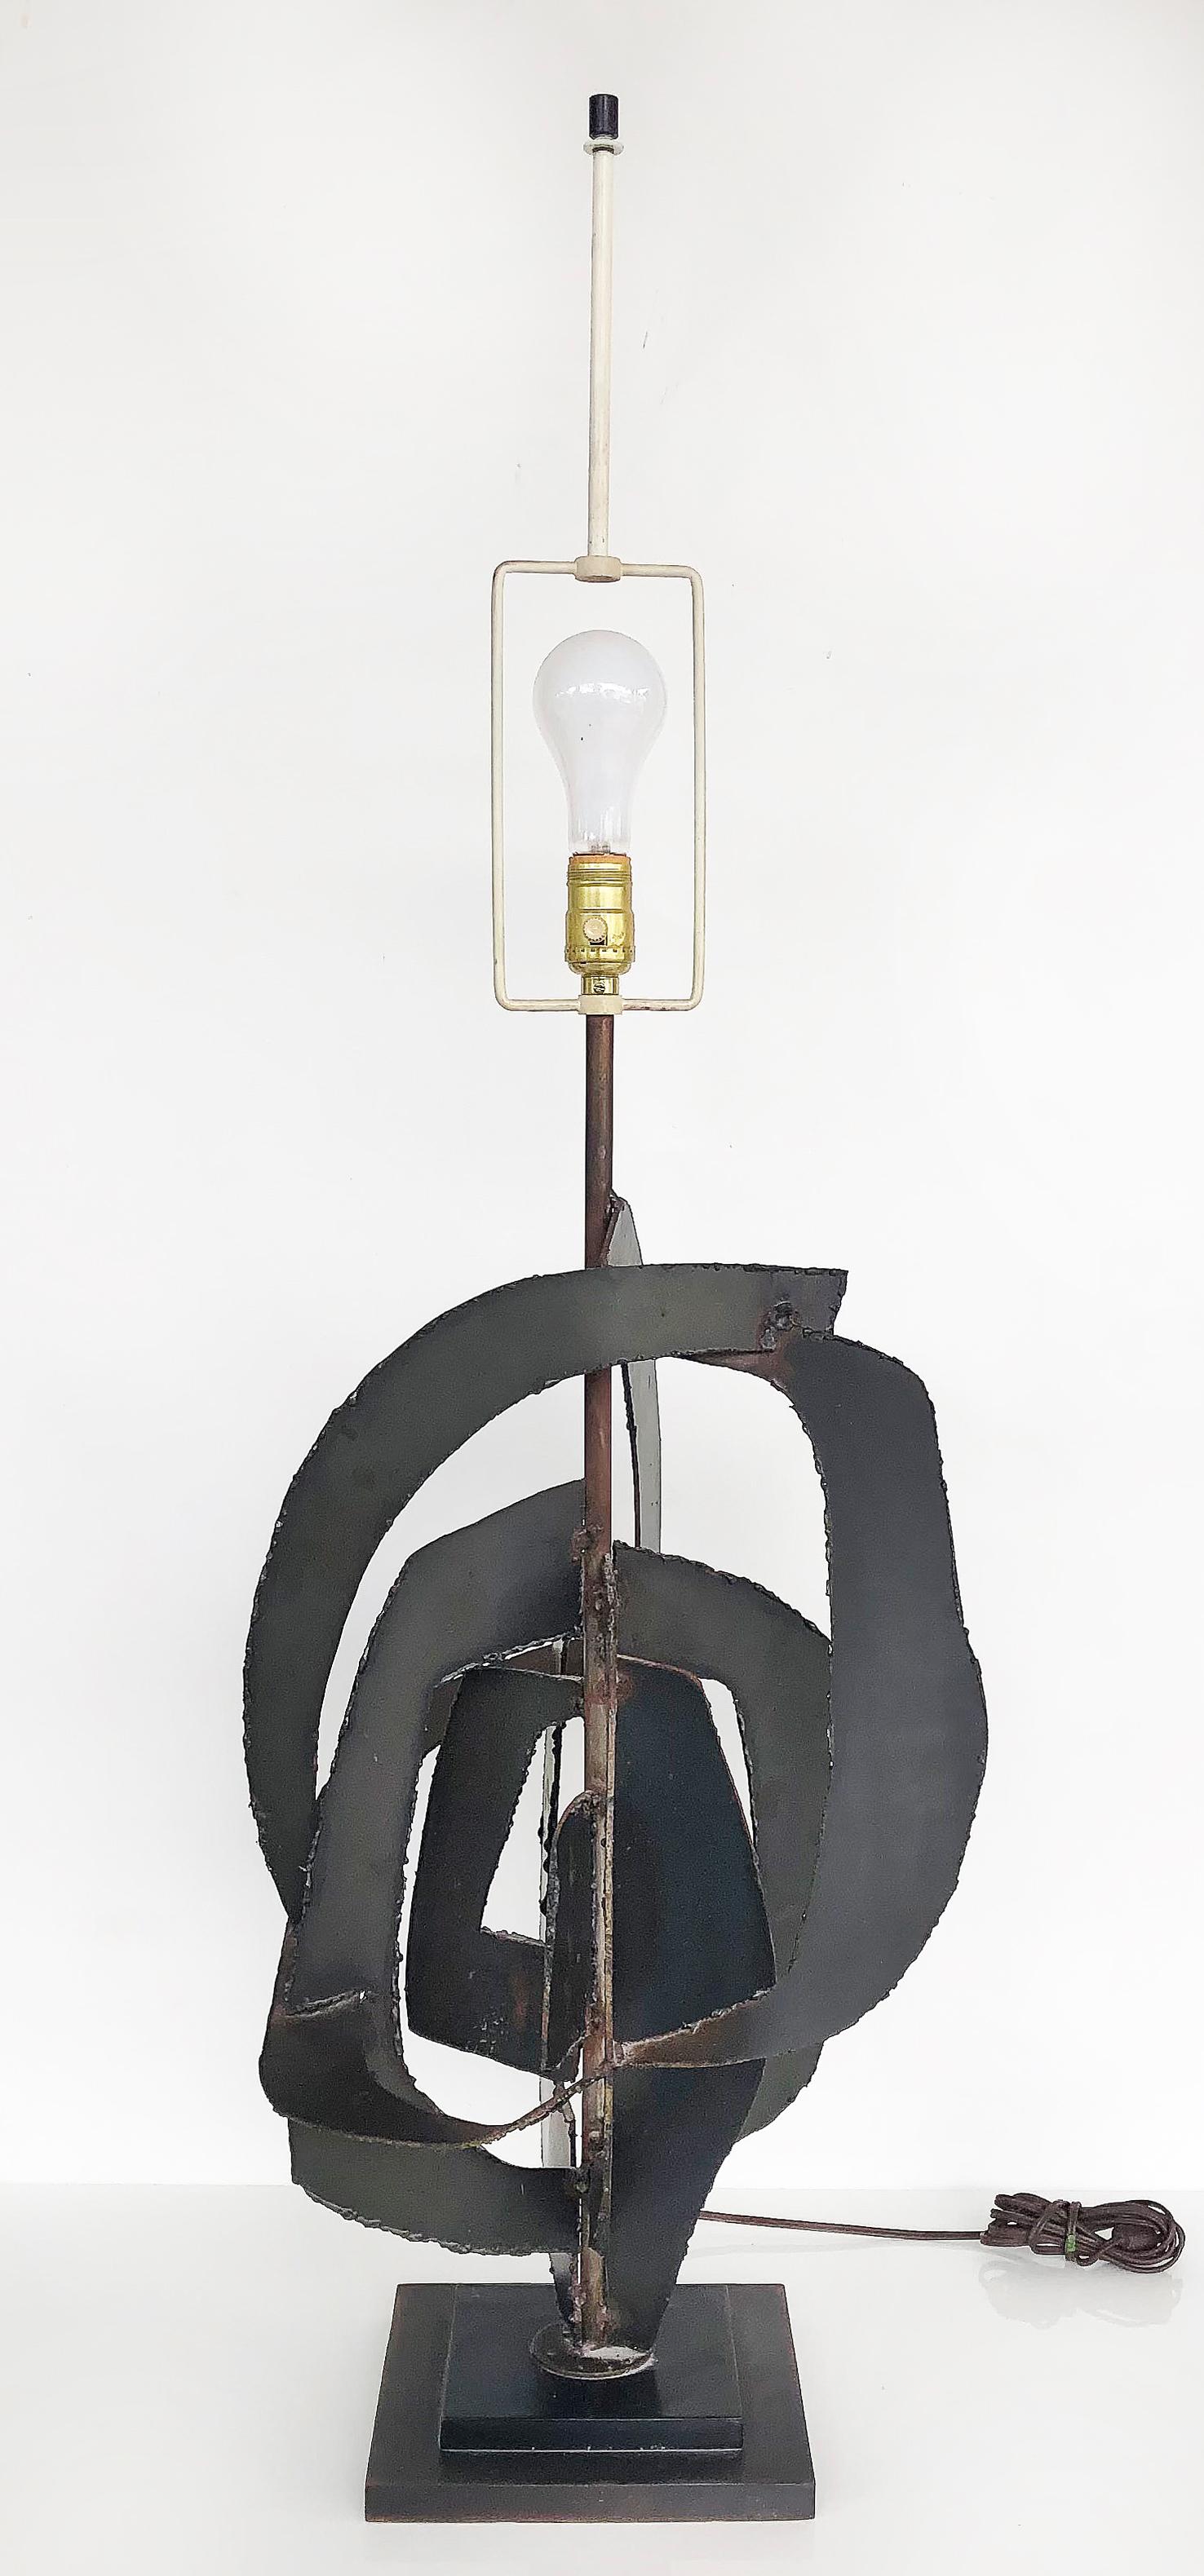 Brutalist Harry Balmer Laurel Lamp Torch Cut Iron Lamp, circa 1970

Offered for sale is a brutalist torch cut iron table lamp designed by Harry Balmer for Laurel Lamp Co. circa 1970, The lamp is sold together with its original shade. The lamp